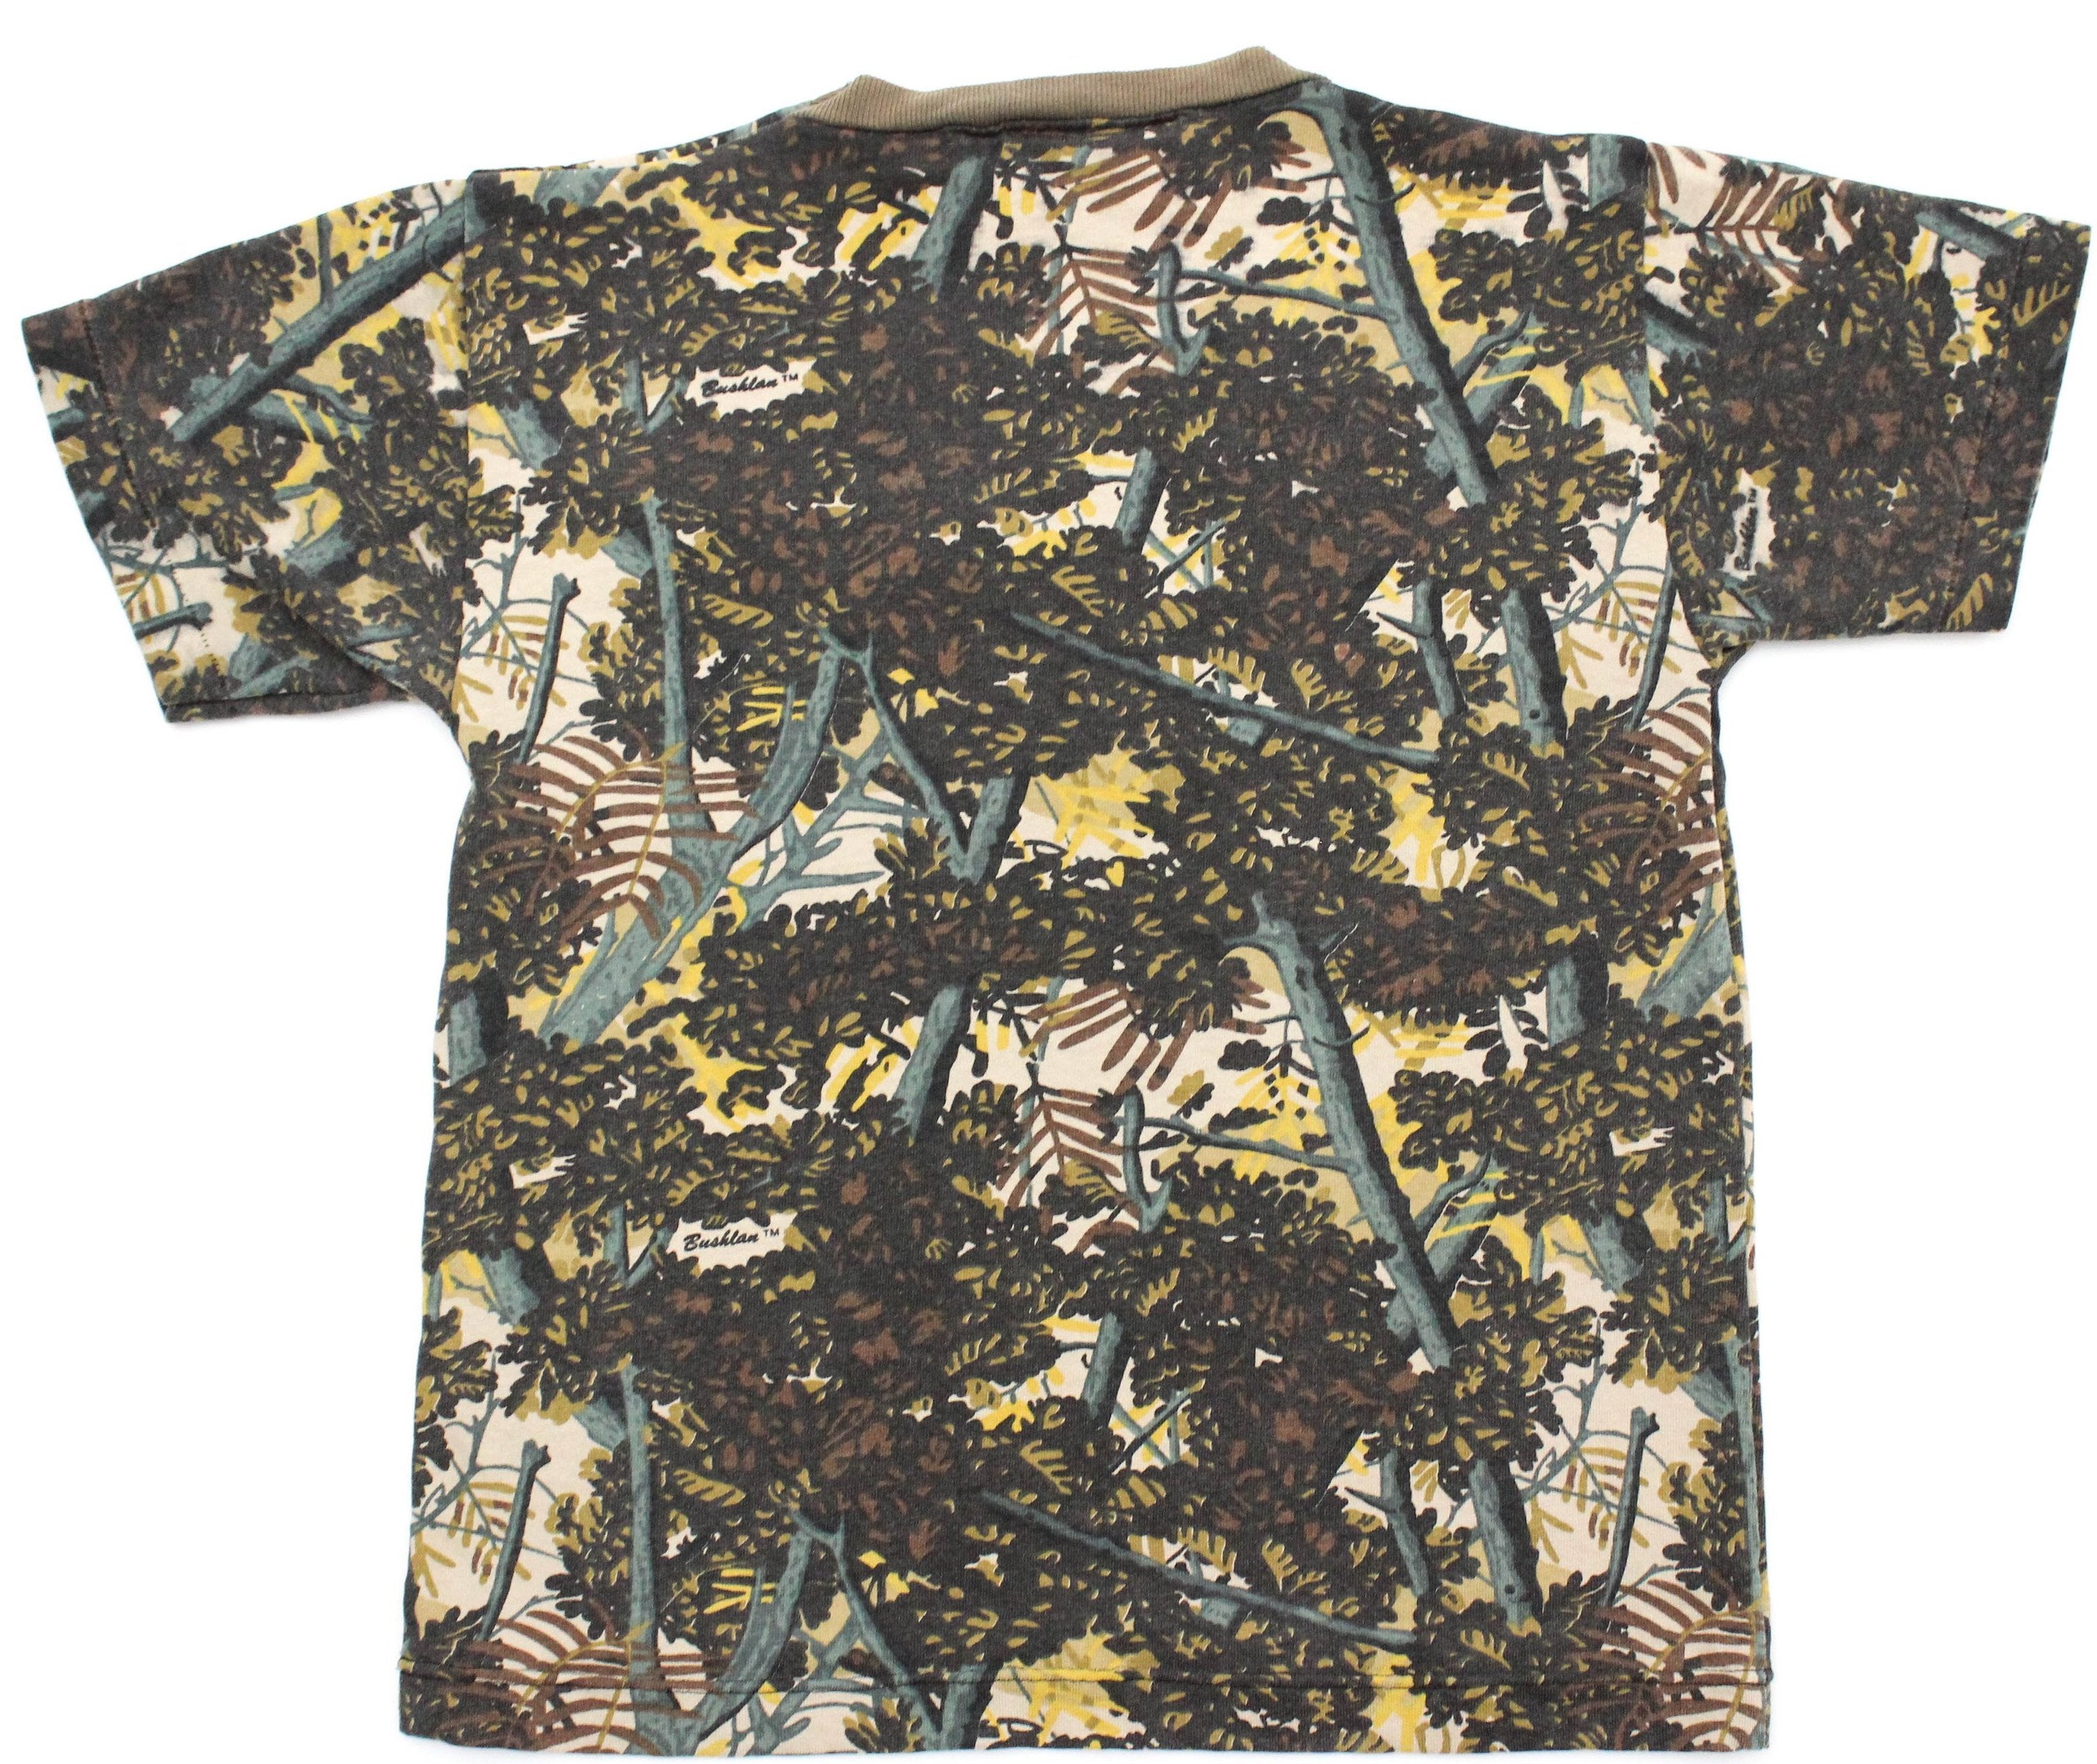 Bushlan Camo Reworked 80s Youth S/M *1 of 1*